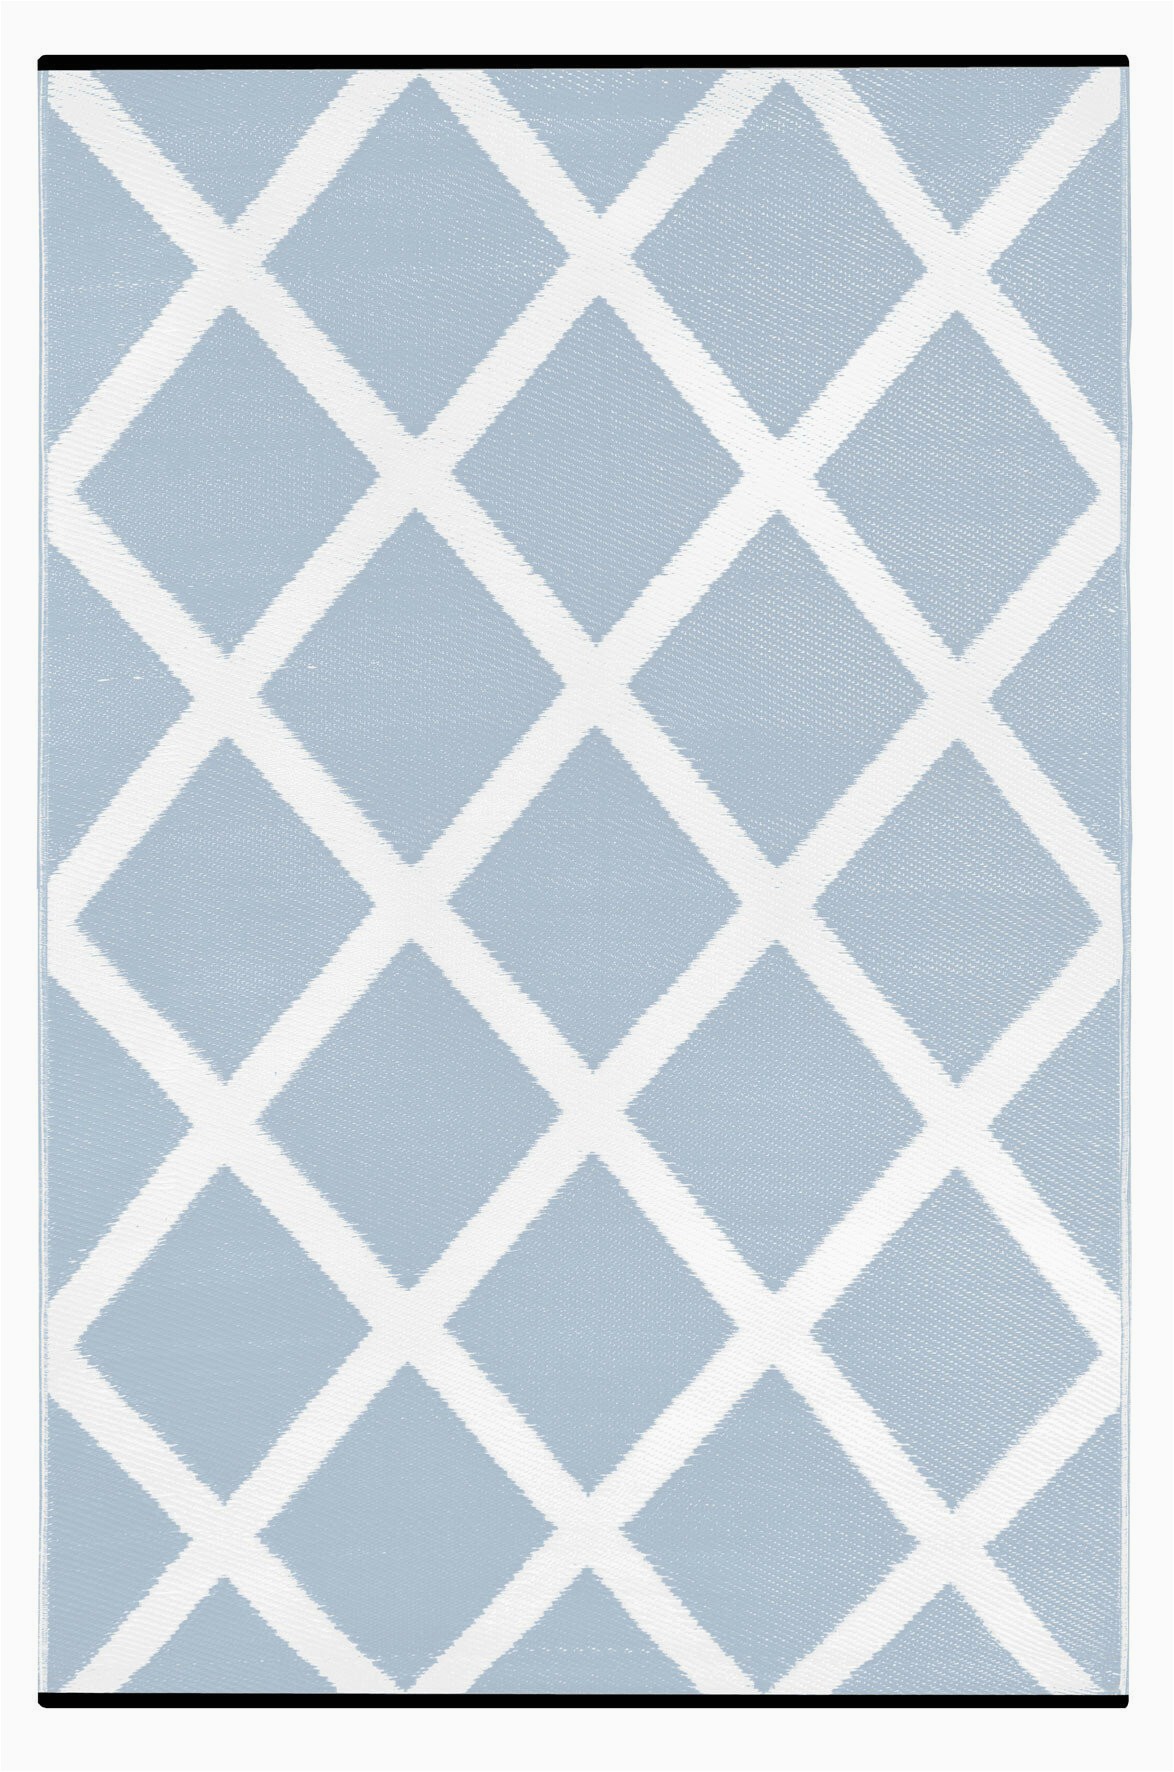 Outdoor Blue and White Rug Lightweight Reversible Diamond Light Blue White Indoor Outdoor area Rug